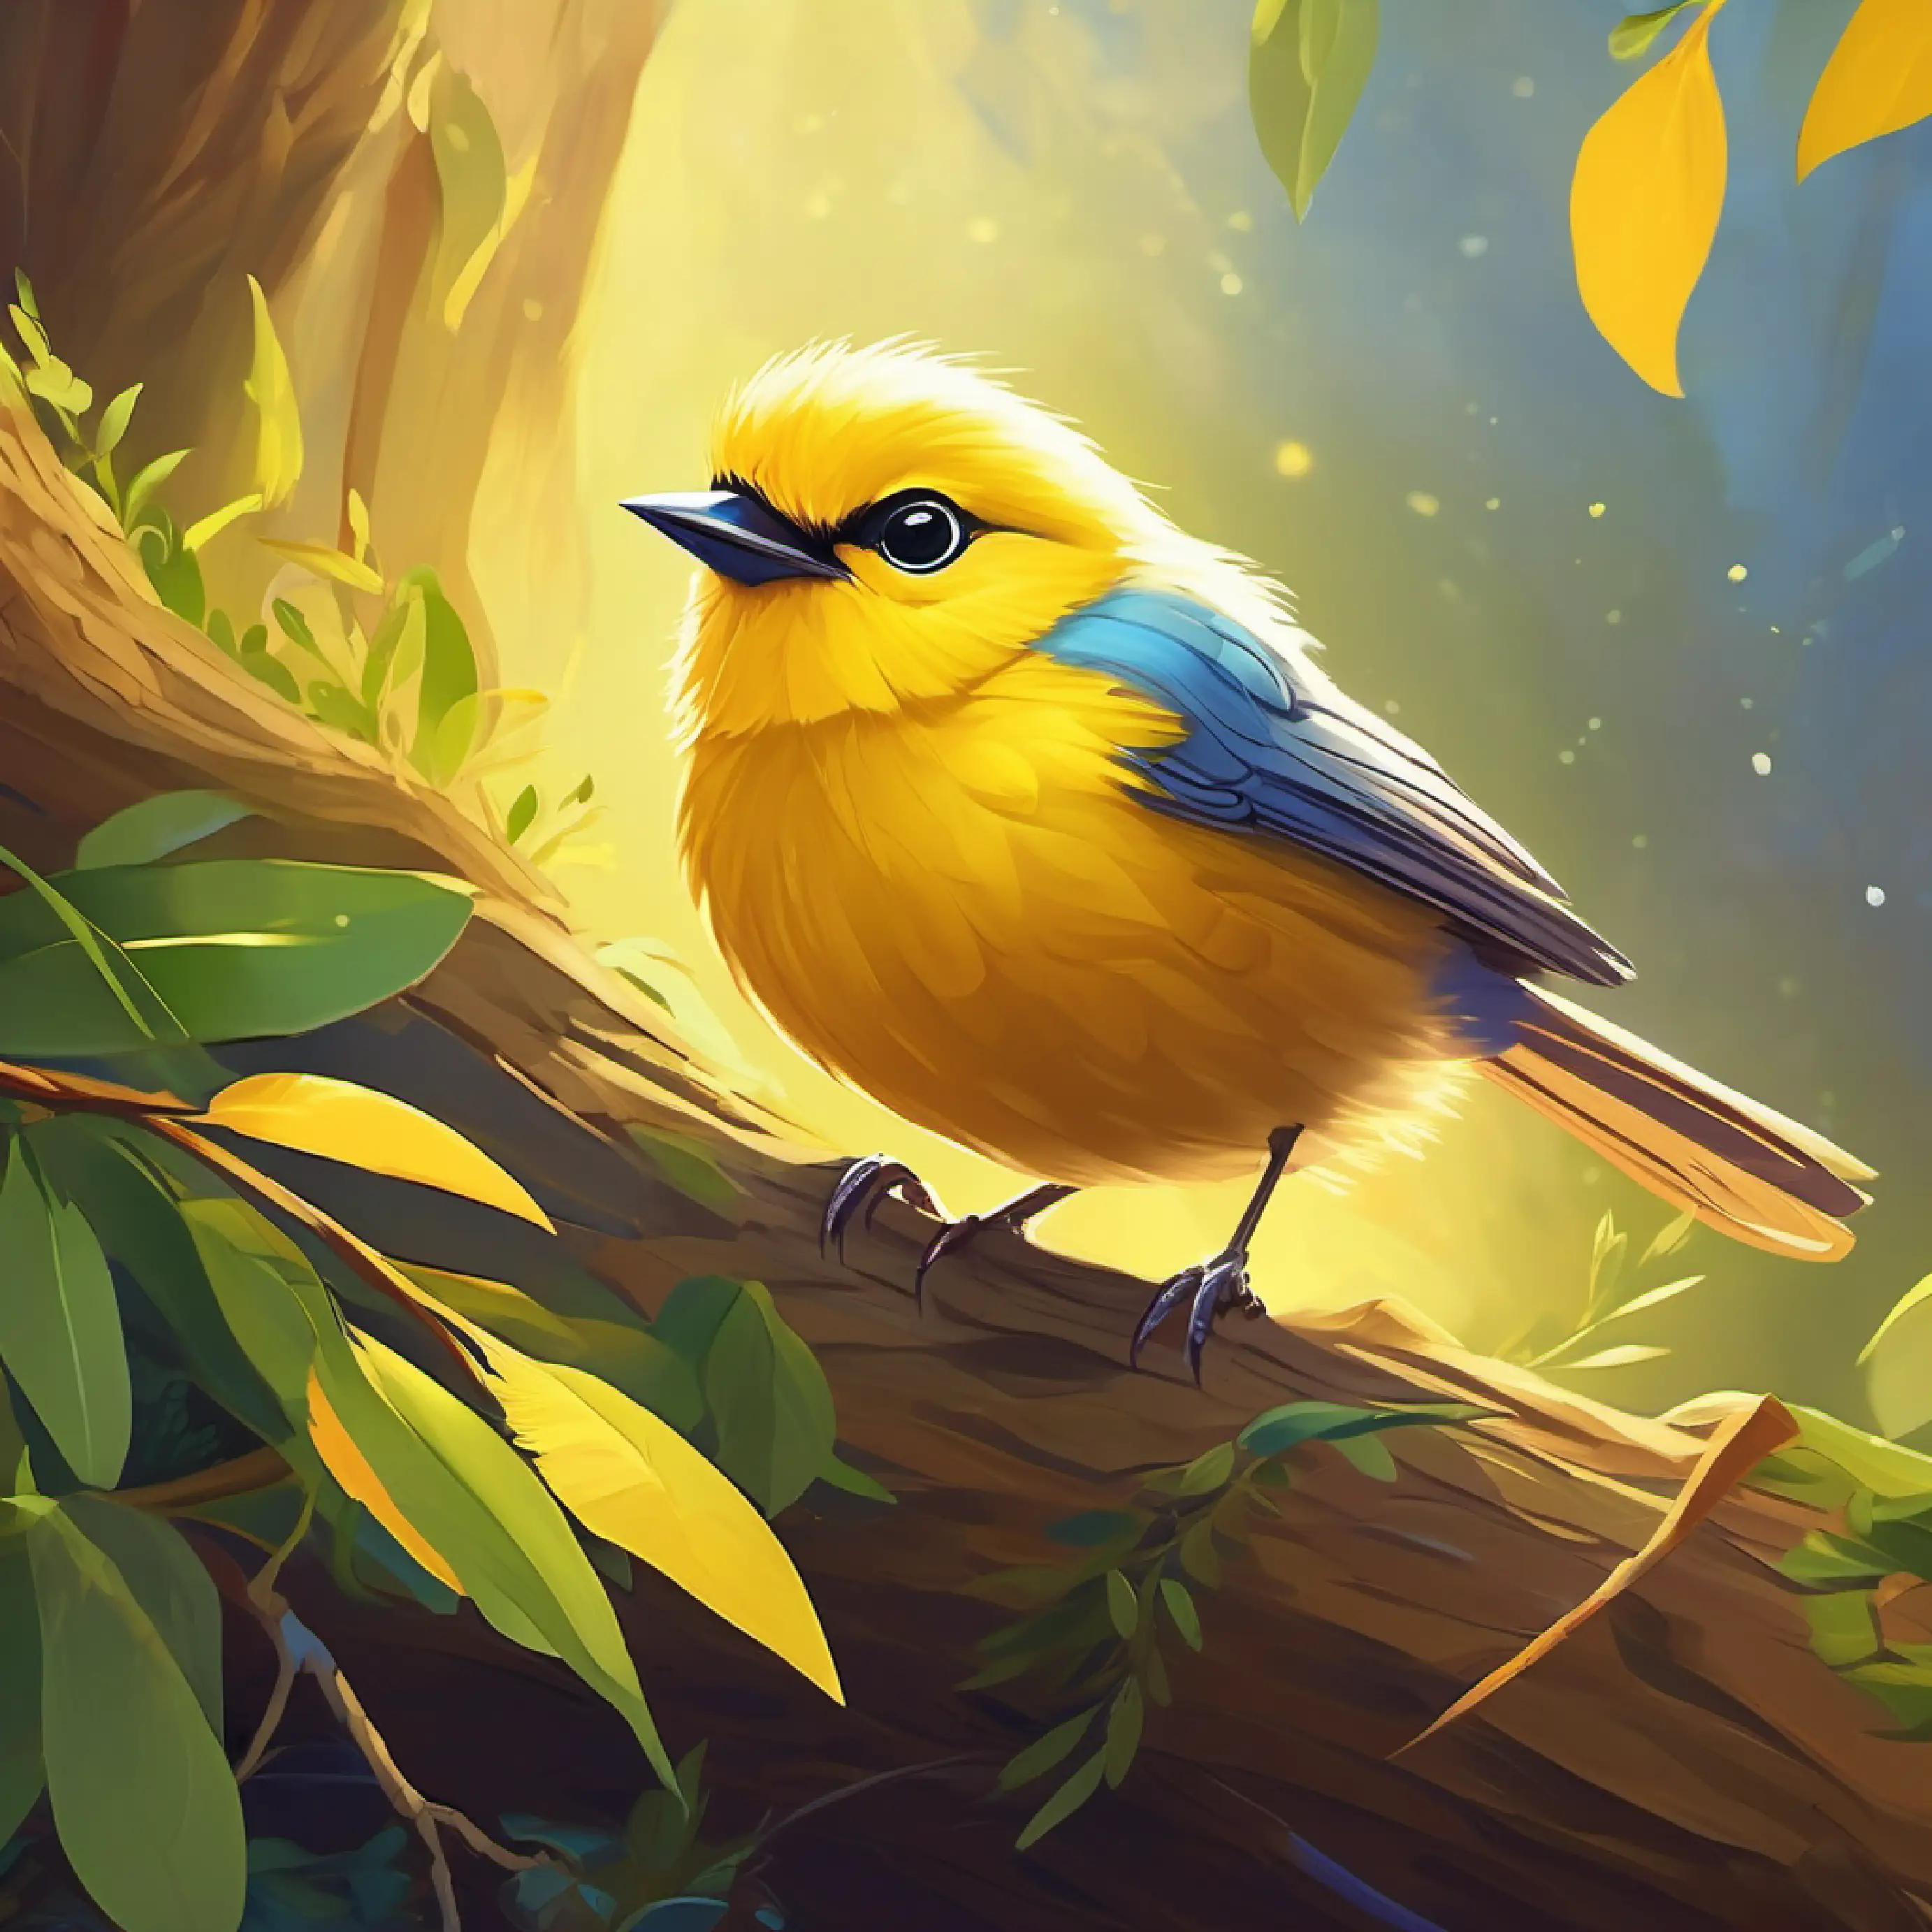 A bright, small bird with yellow feathers and curious eyes leaves the nest early, happy about her morning adventure.